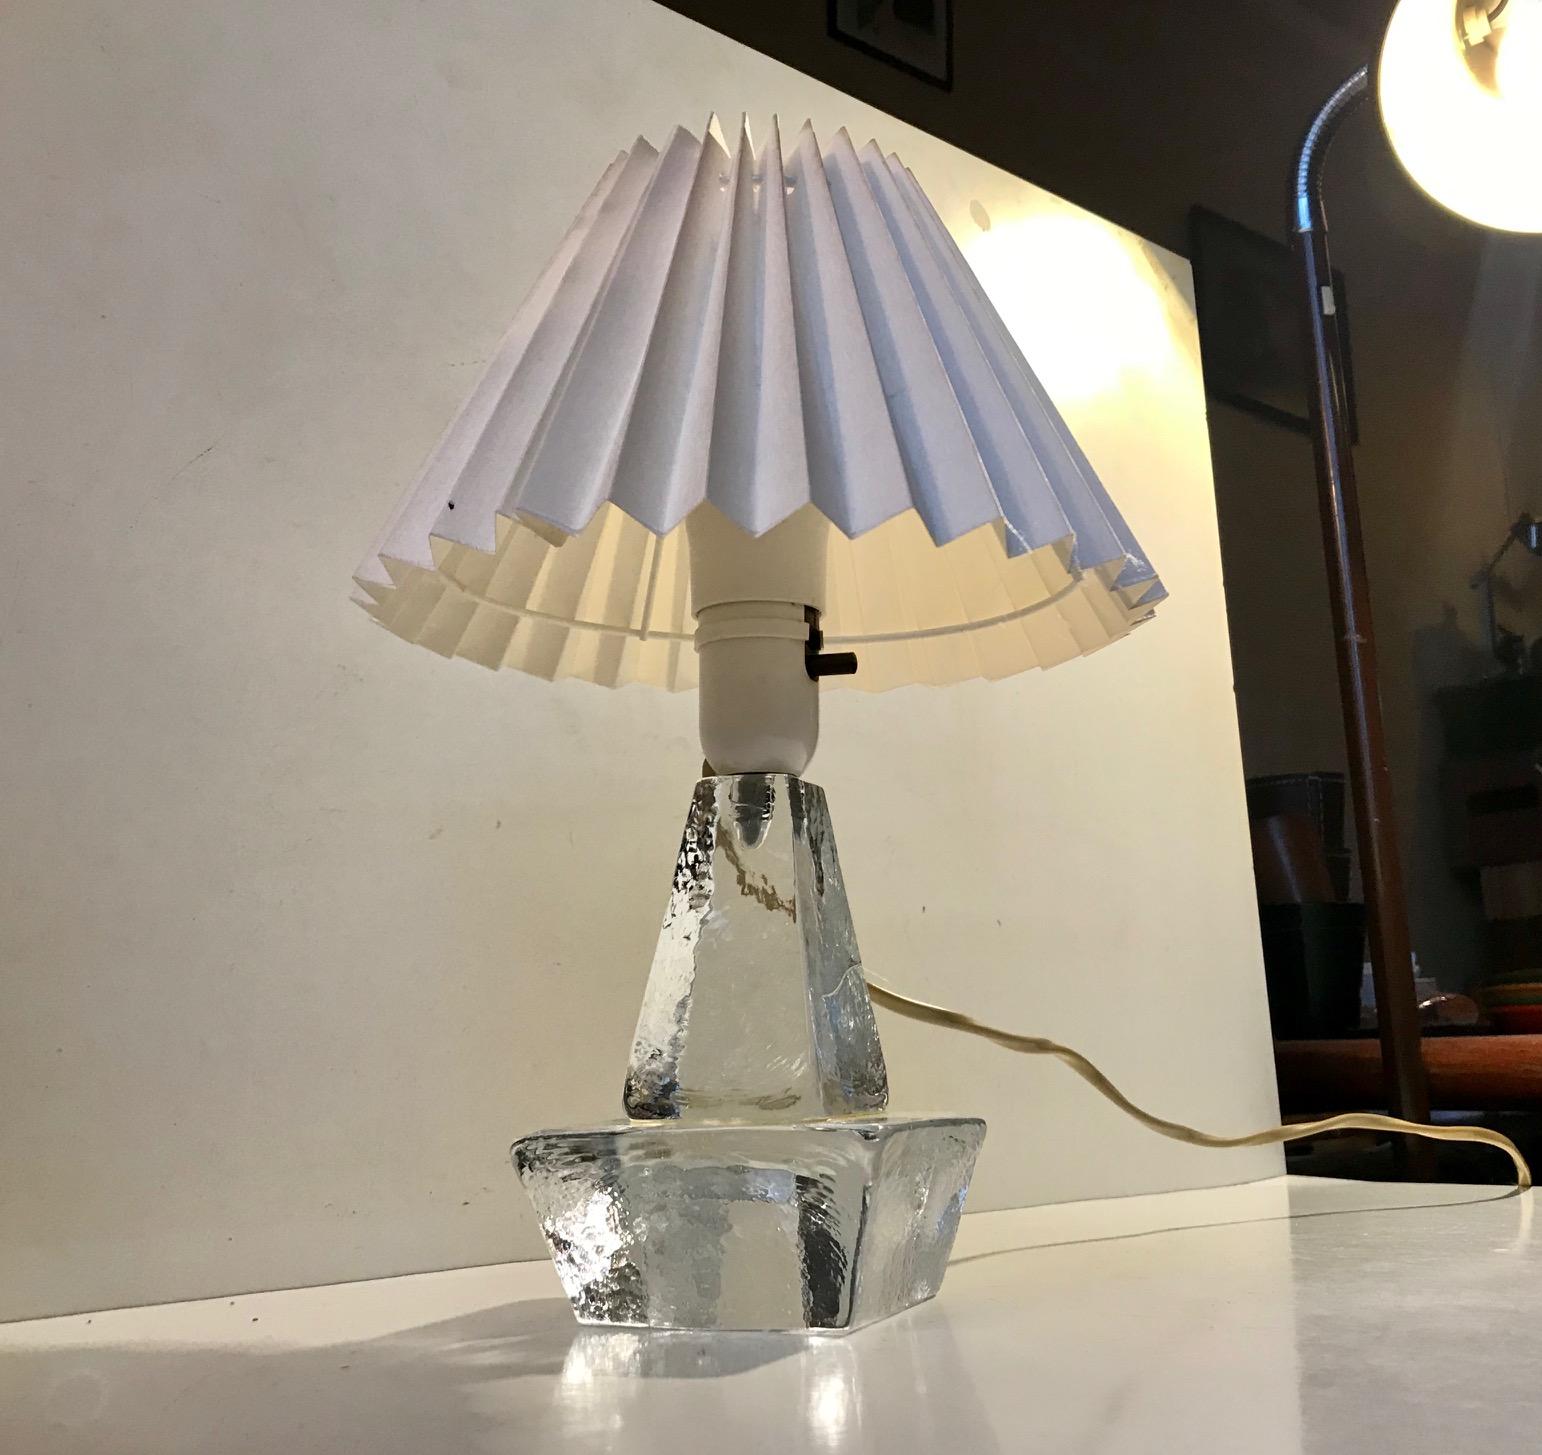 A tower shaped table lamp in iced glass - mimicking melting ice. Designed and manufactured by Atelje Engberg in Sweden during the 1970s in a style reminiscent of Erik Hoglund and Tapio Wirkkala. The height of this light is 29 cm with the bulb. The